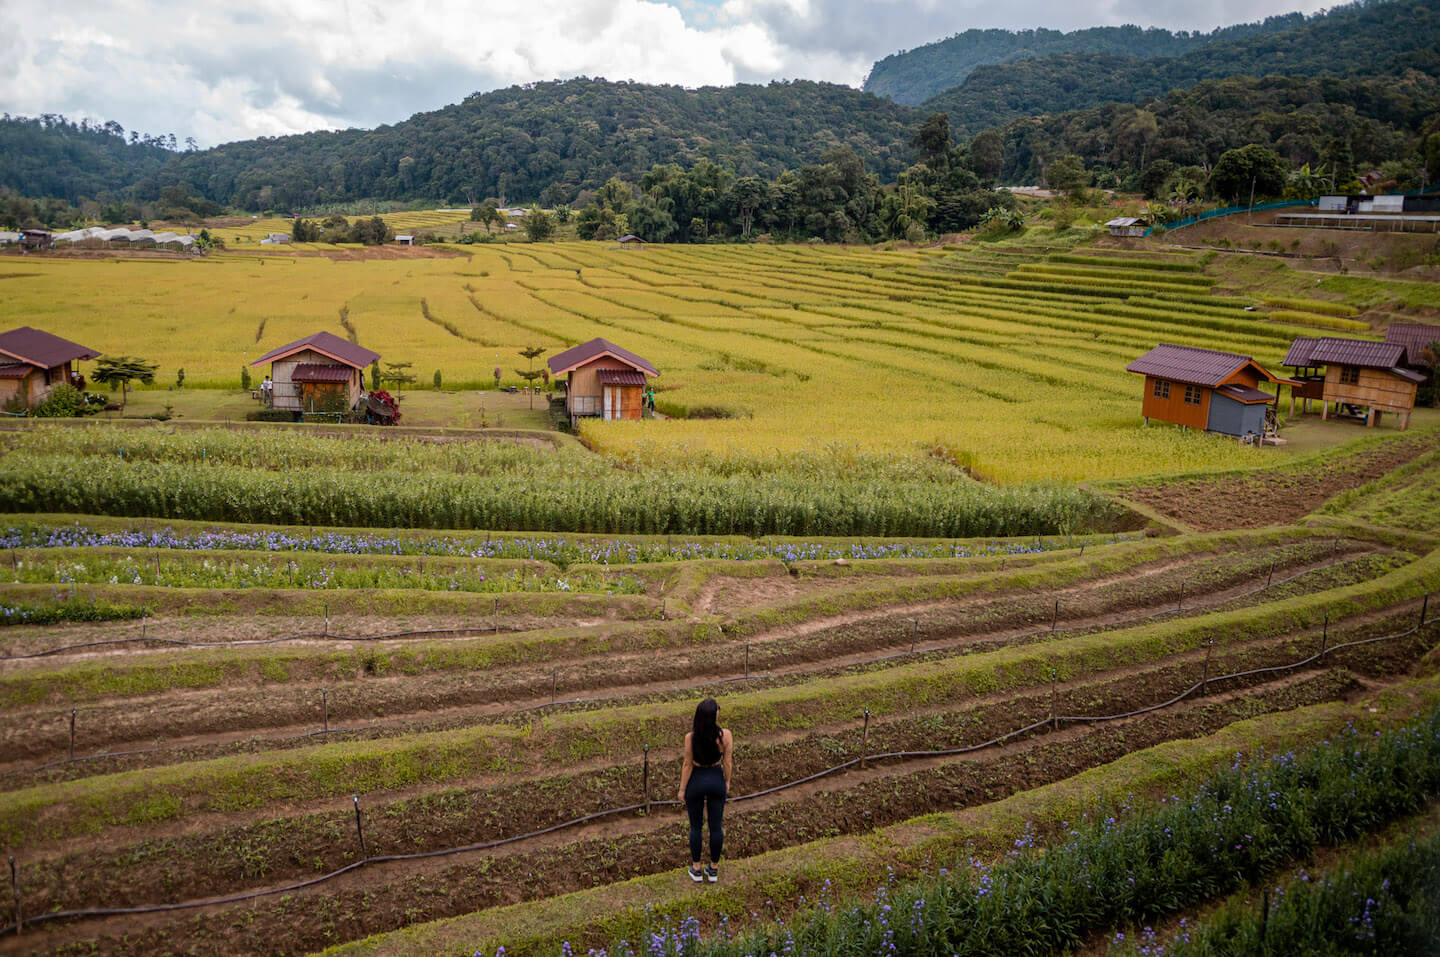 Stella standing within rice fields 3 days in Chiang Mai